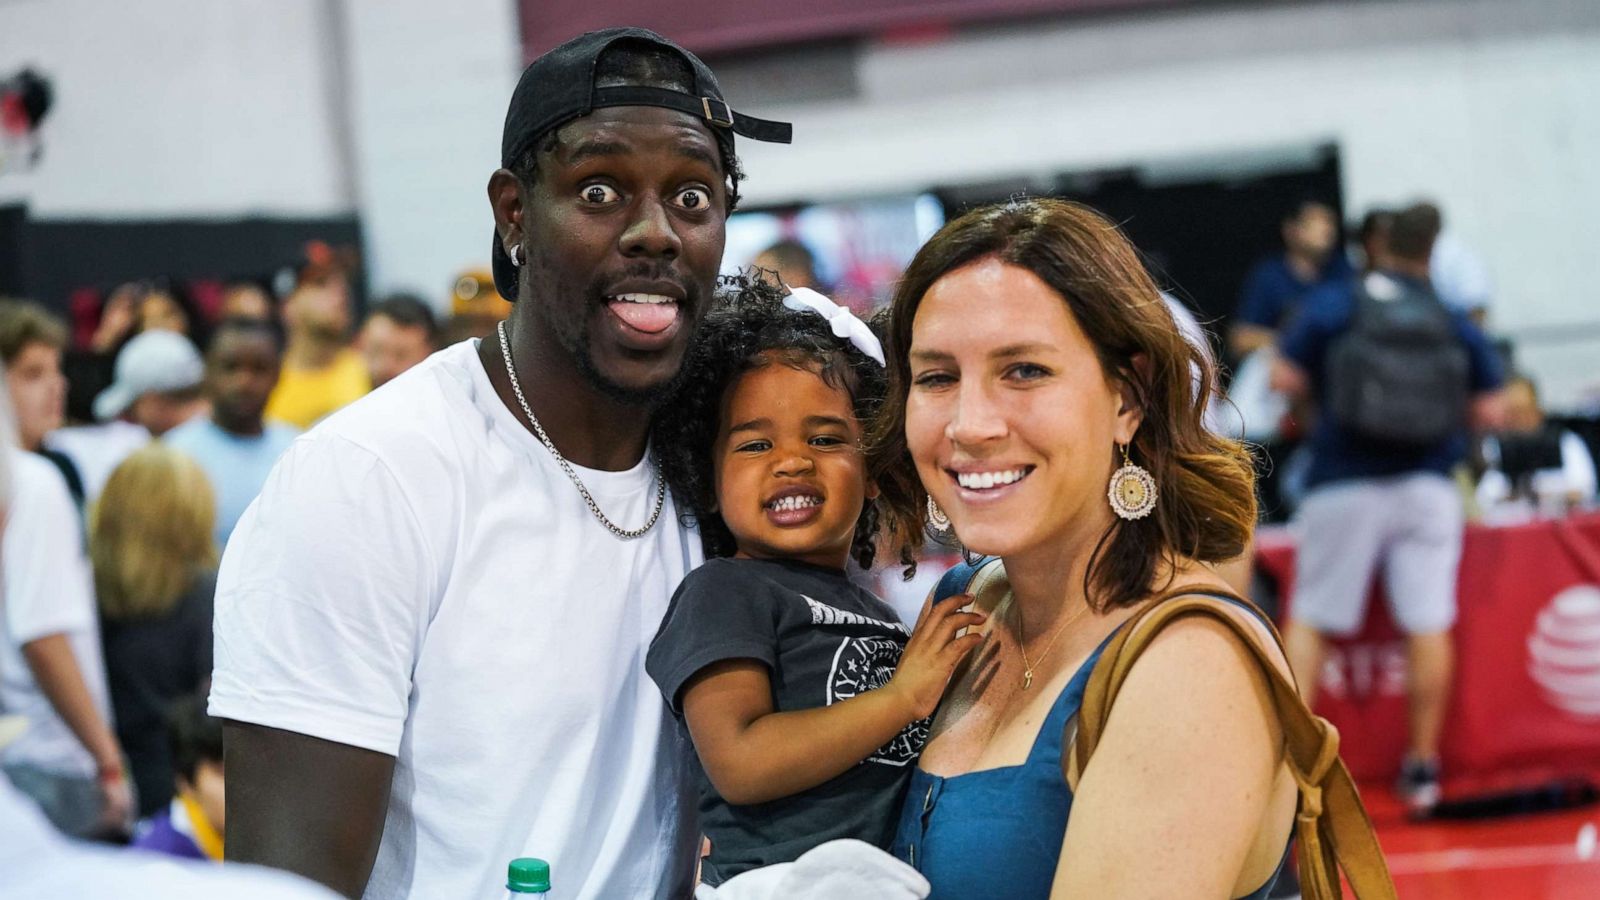 Jrue Holiday to launch a social justice fund with the rest of his 2020 NBA  salary